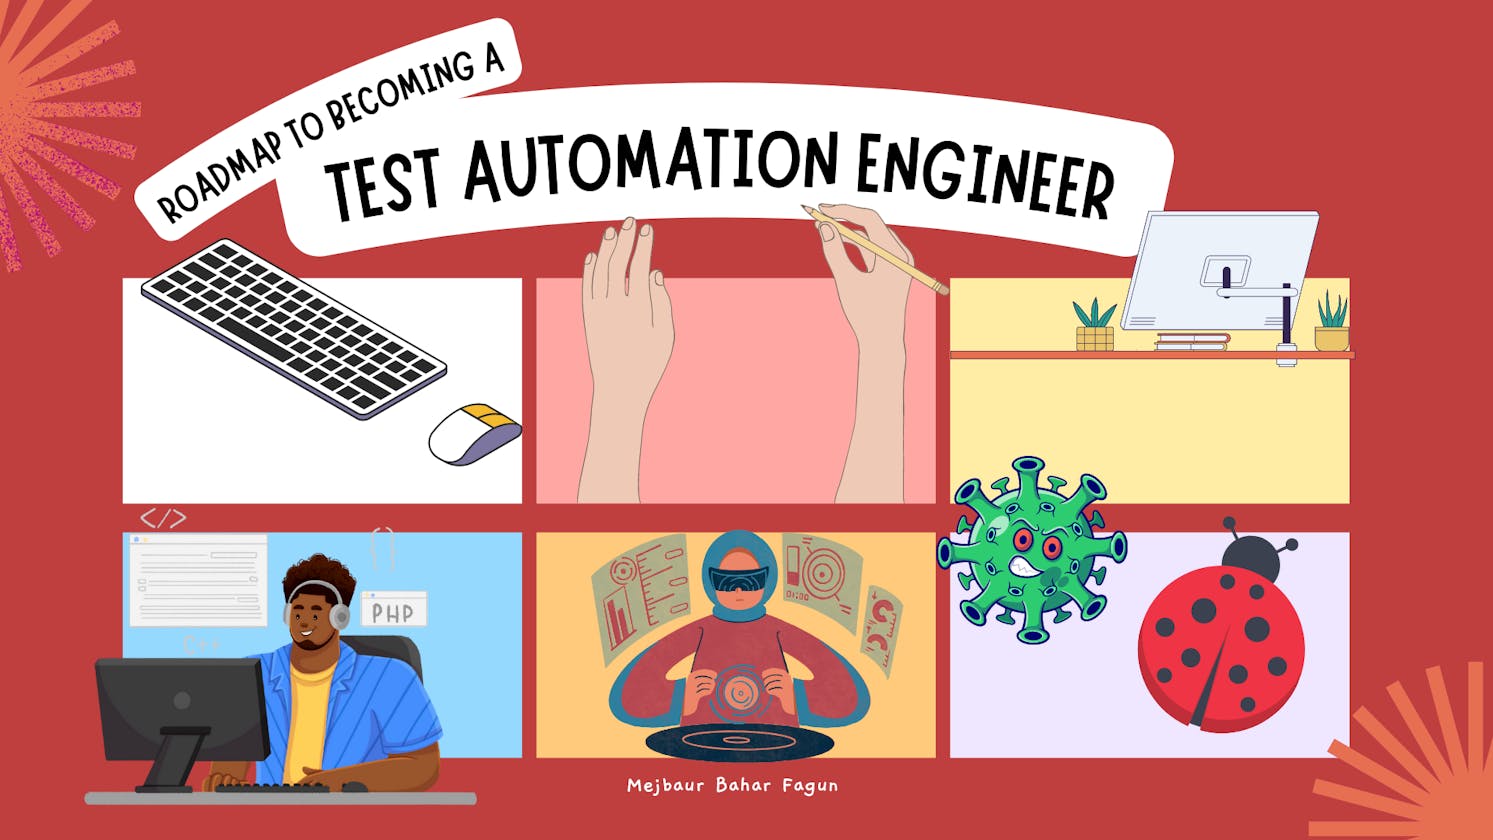 🚀🔬 Roadmap To Becoming A Test Automation Engineer 🤖📚